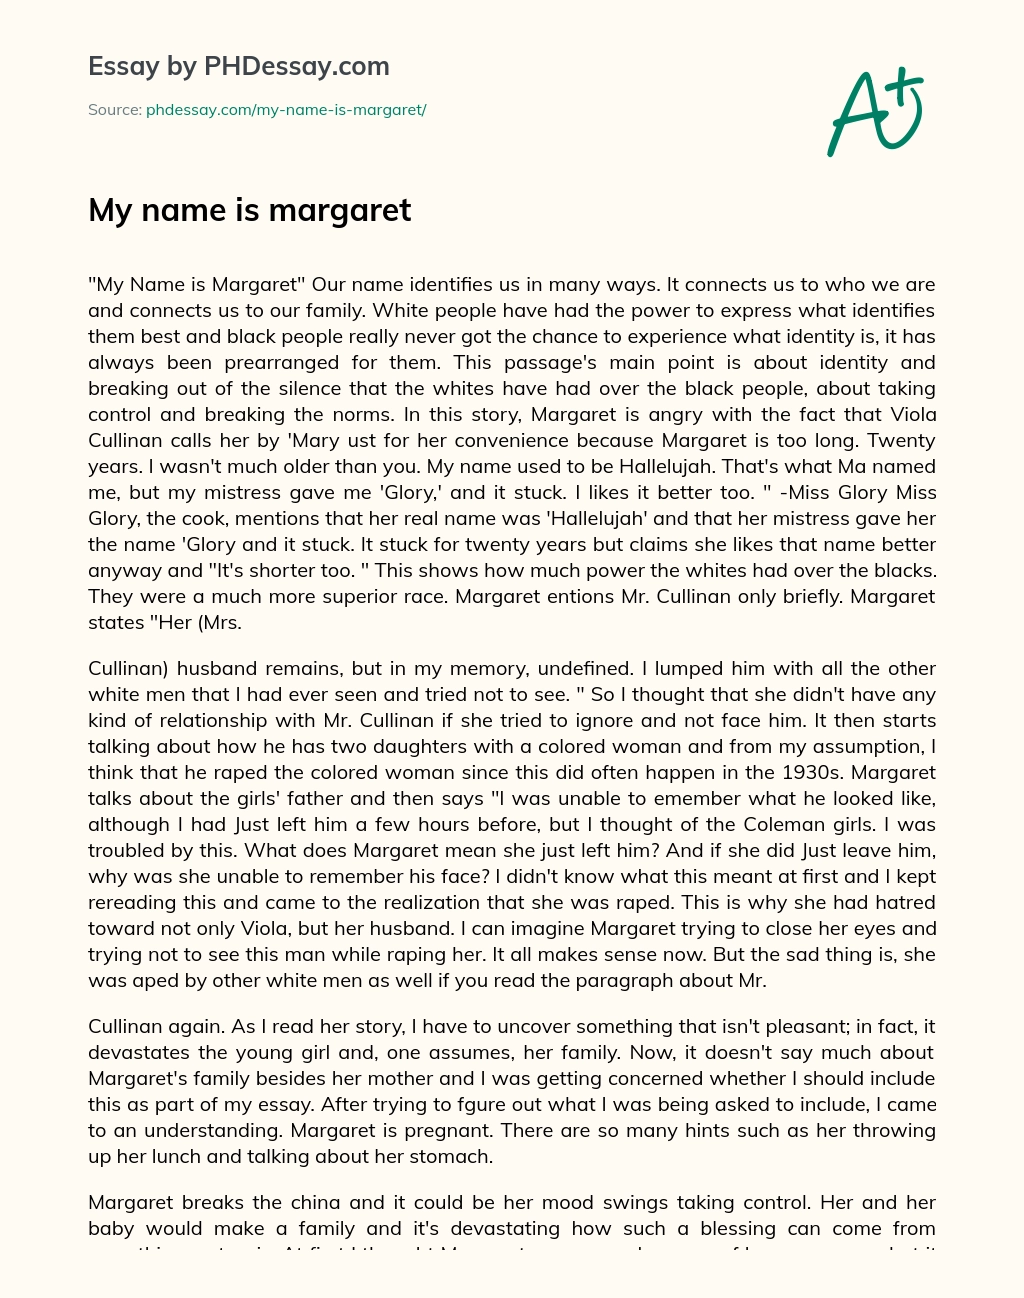 My name is Margaret essay